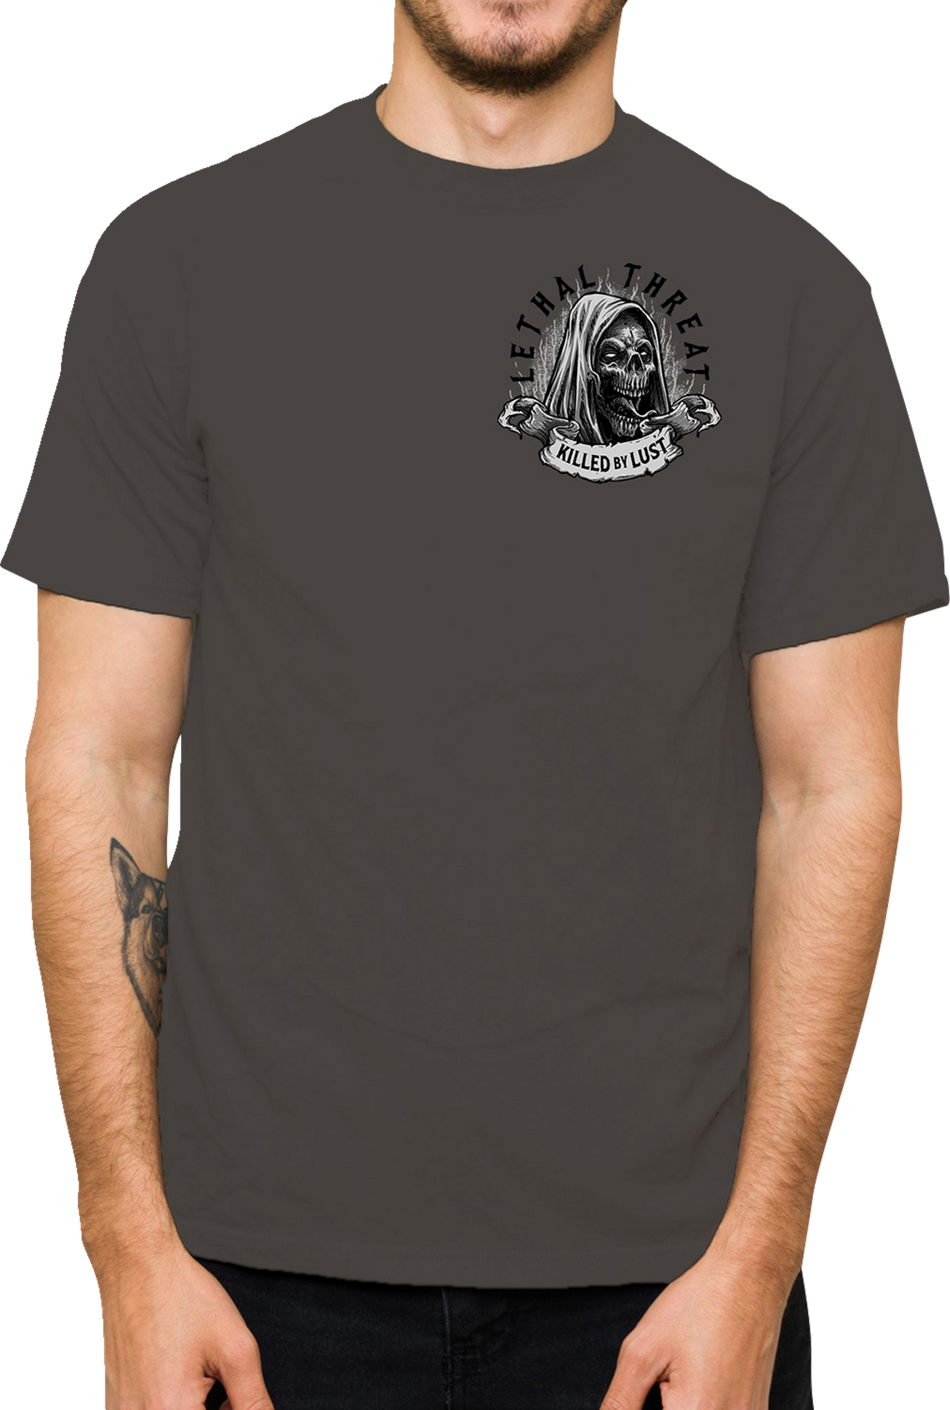 LETHAL THREAT Killed by Lust T-Shirt - Gray - Large LT20903L